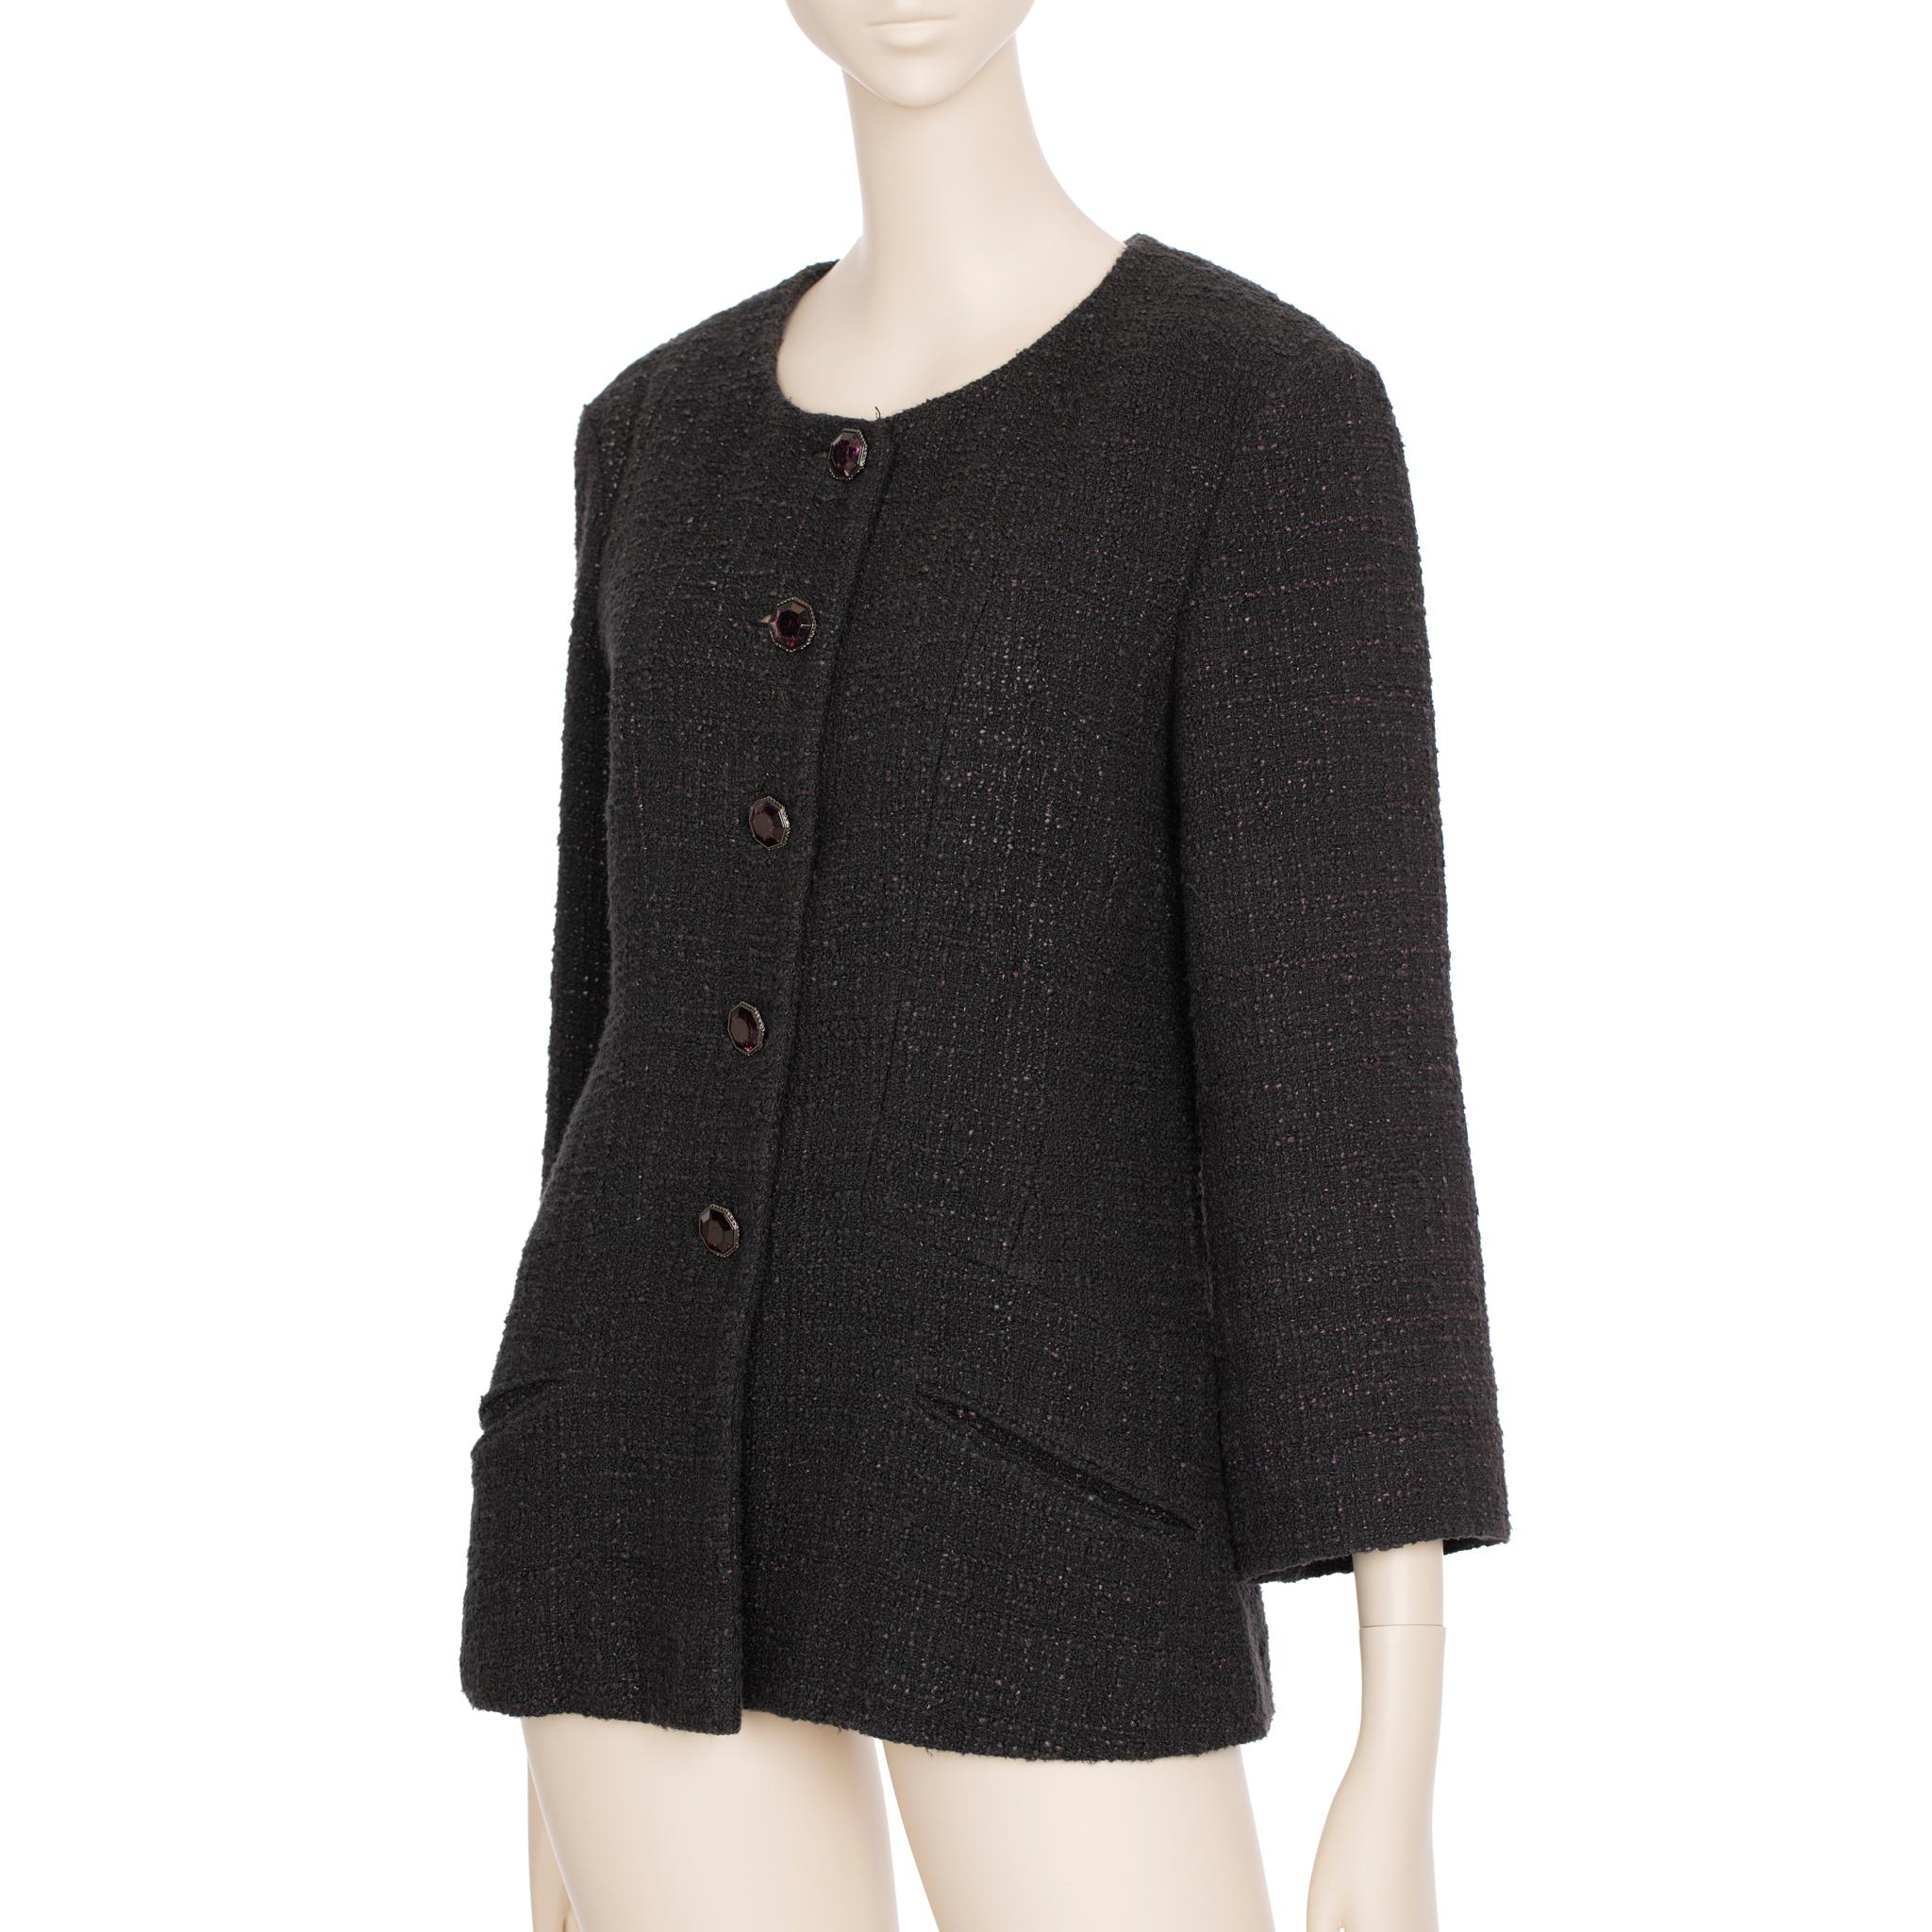 This Chanel Tweed Multi-button Crew Neck Jacket is an exquisite piece. Crafted from a wool tweed blend and featuring burgundy crystal buttons, it will make a timeless addition to any wardrobe.

Brand: Chanel

Product: Multi-button Crew Neck